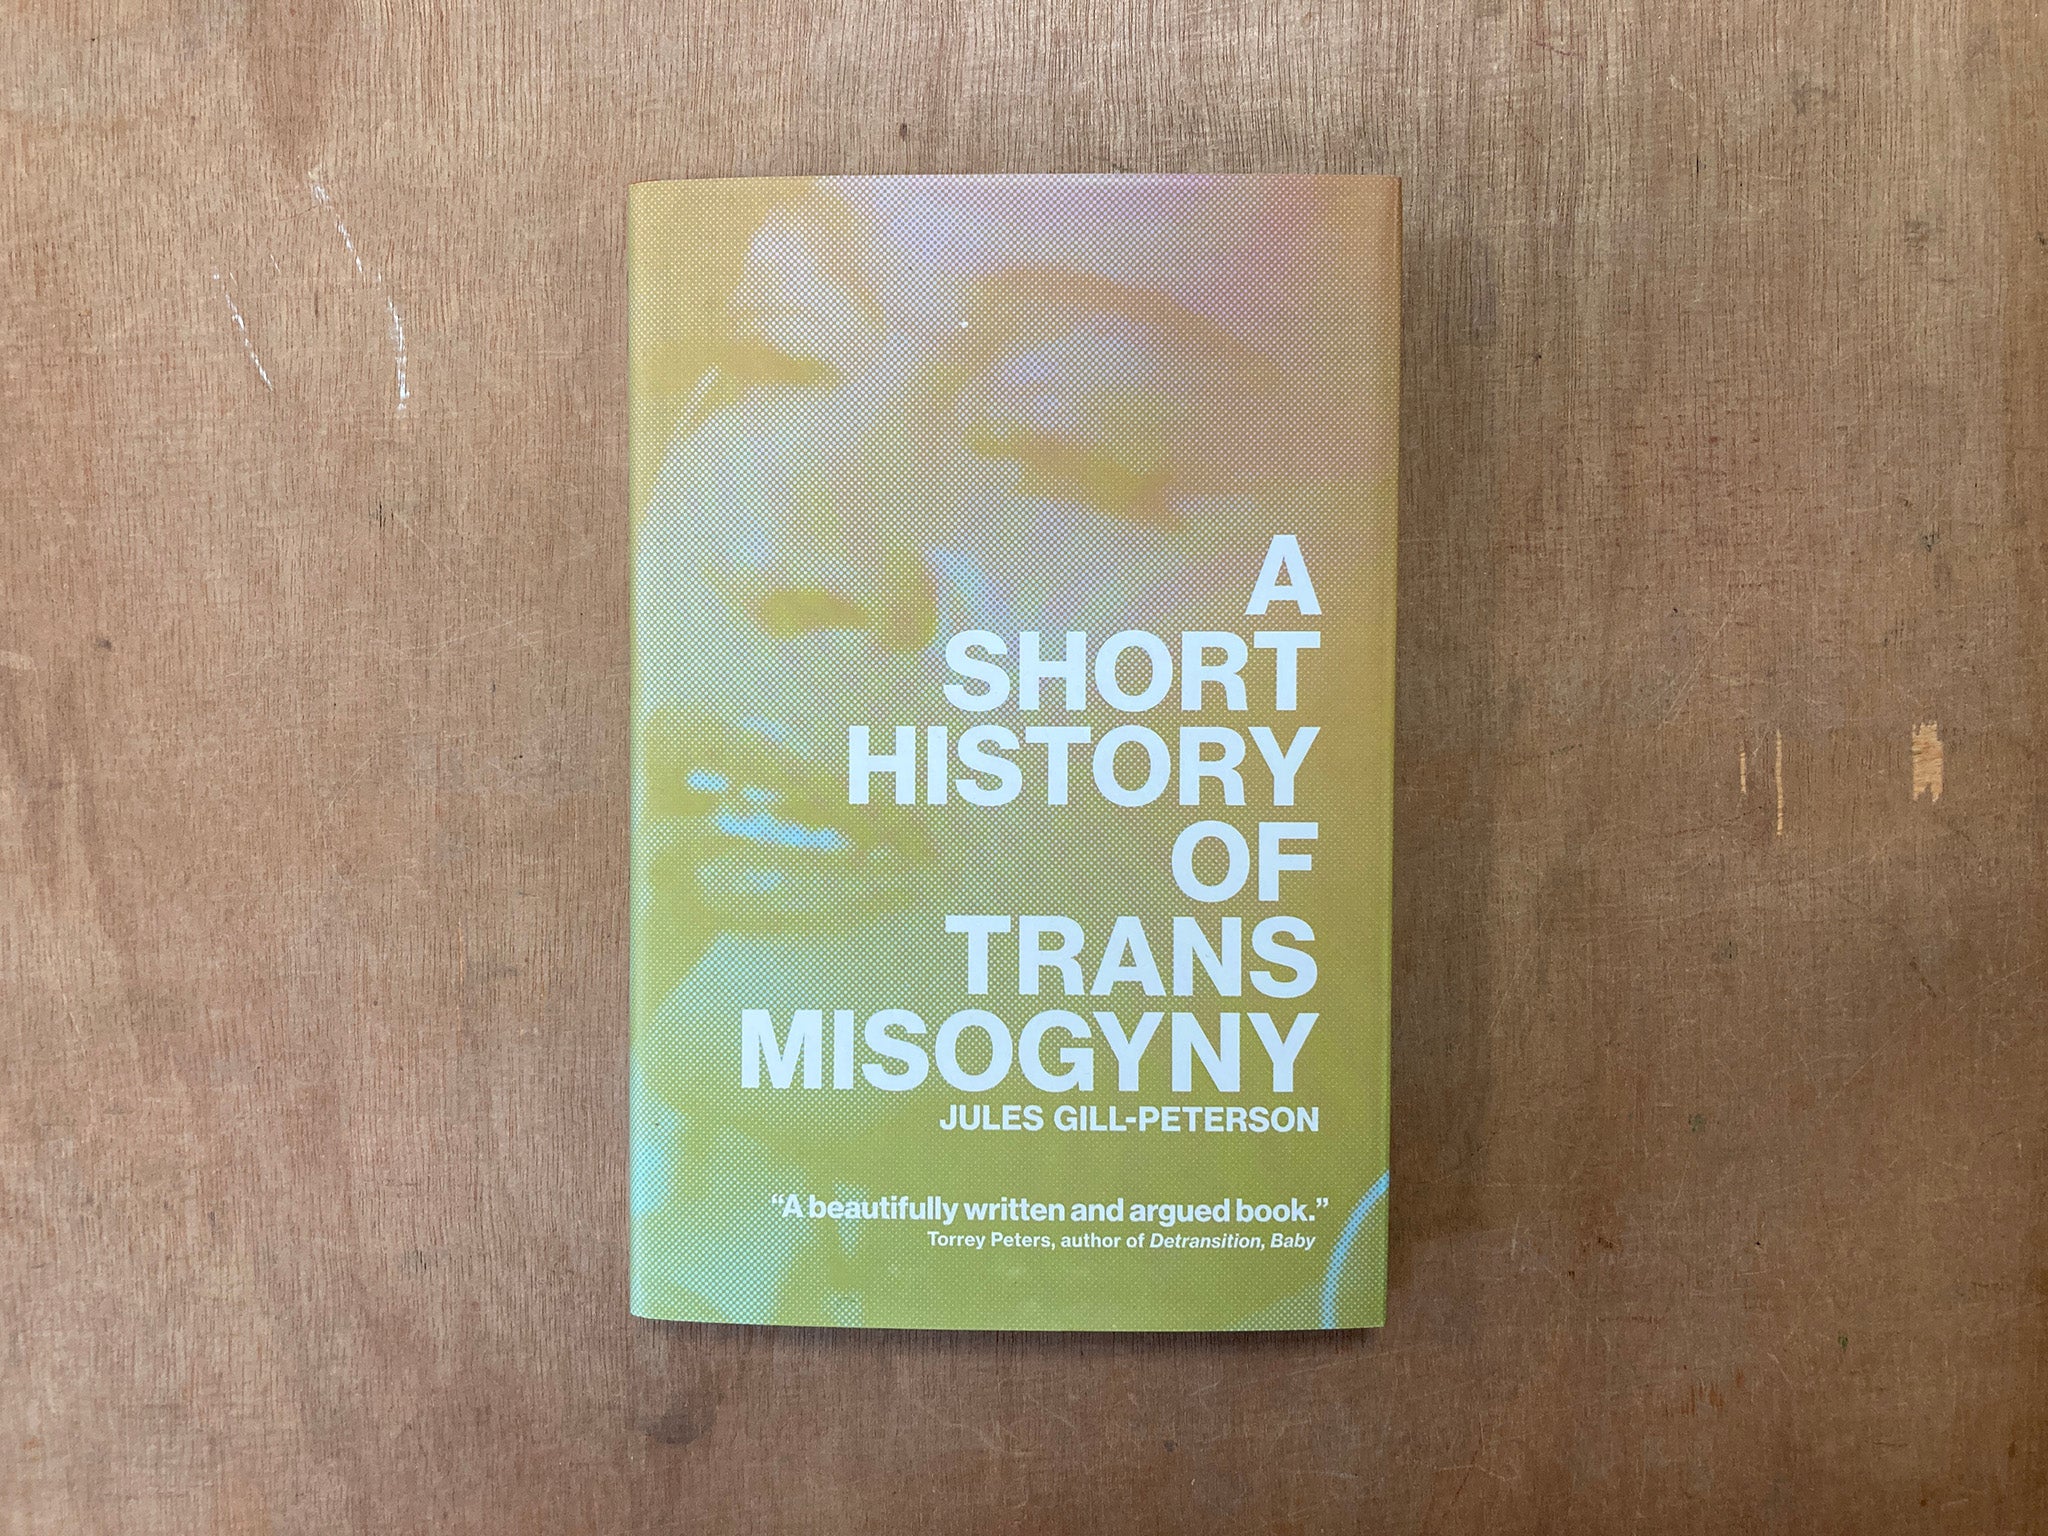 A SHORT HISTORY OF TRANS MISOGYNY by Jules Gill-Peterson